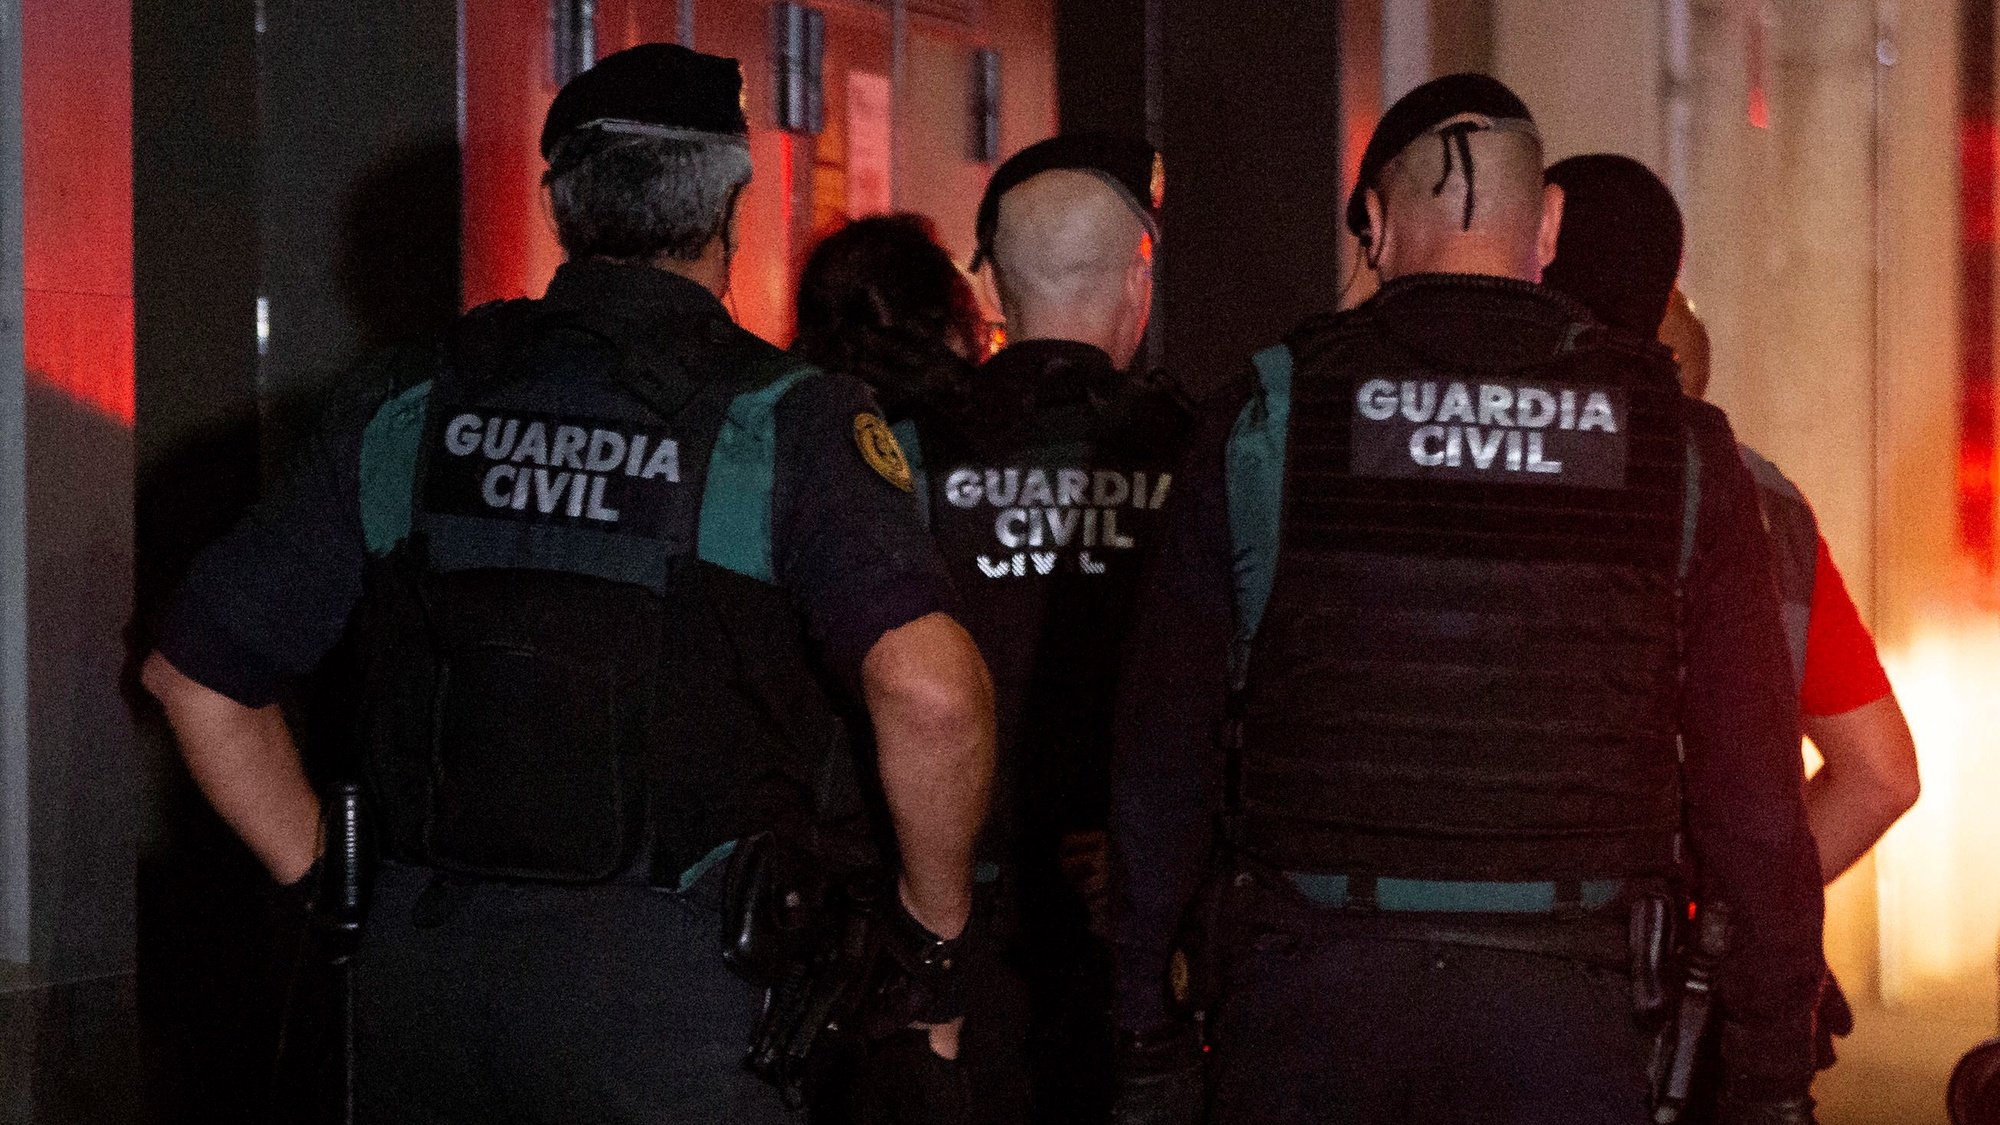 epa07864791 Spanish Guardia Civil officers detain a member of the so-called Committees for the Defense of the Republic (CDR) accused of planning violent actions and terrorism, in Sabadell, Catalonia, Spain, 23 September 2019. Thousand of people have attended several marches around Catalonia demanding the freedom of the nine members of the Committees for the Defense of the Republic (CDR) accused of planning violent actions and terrorism by Prosecution Office.  EPA/Enric Fontcuberta